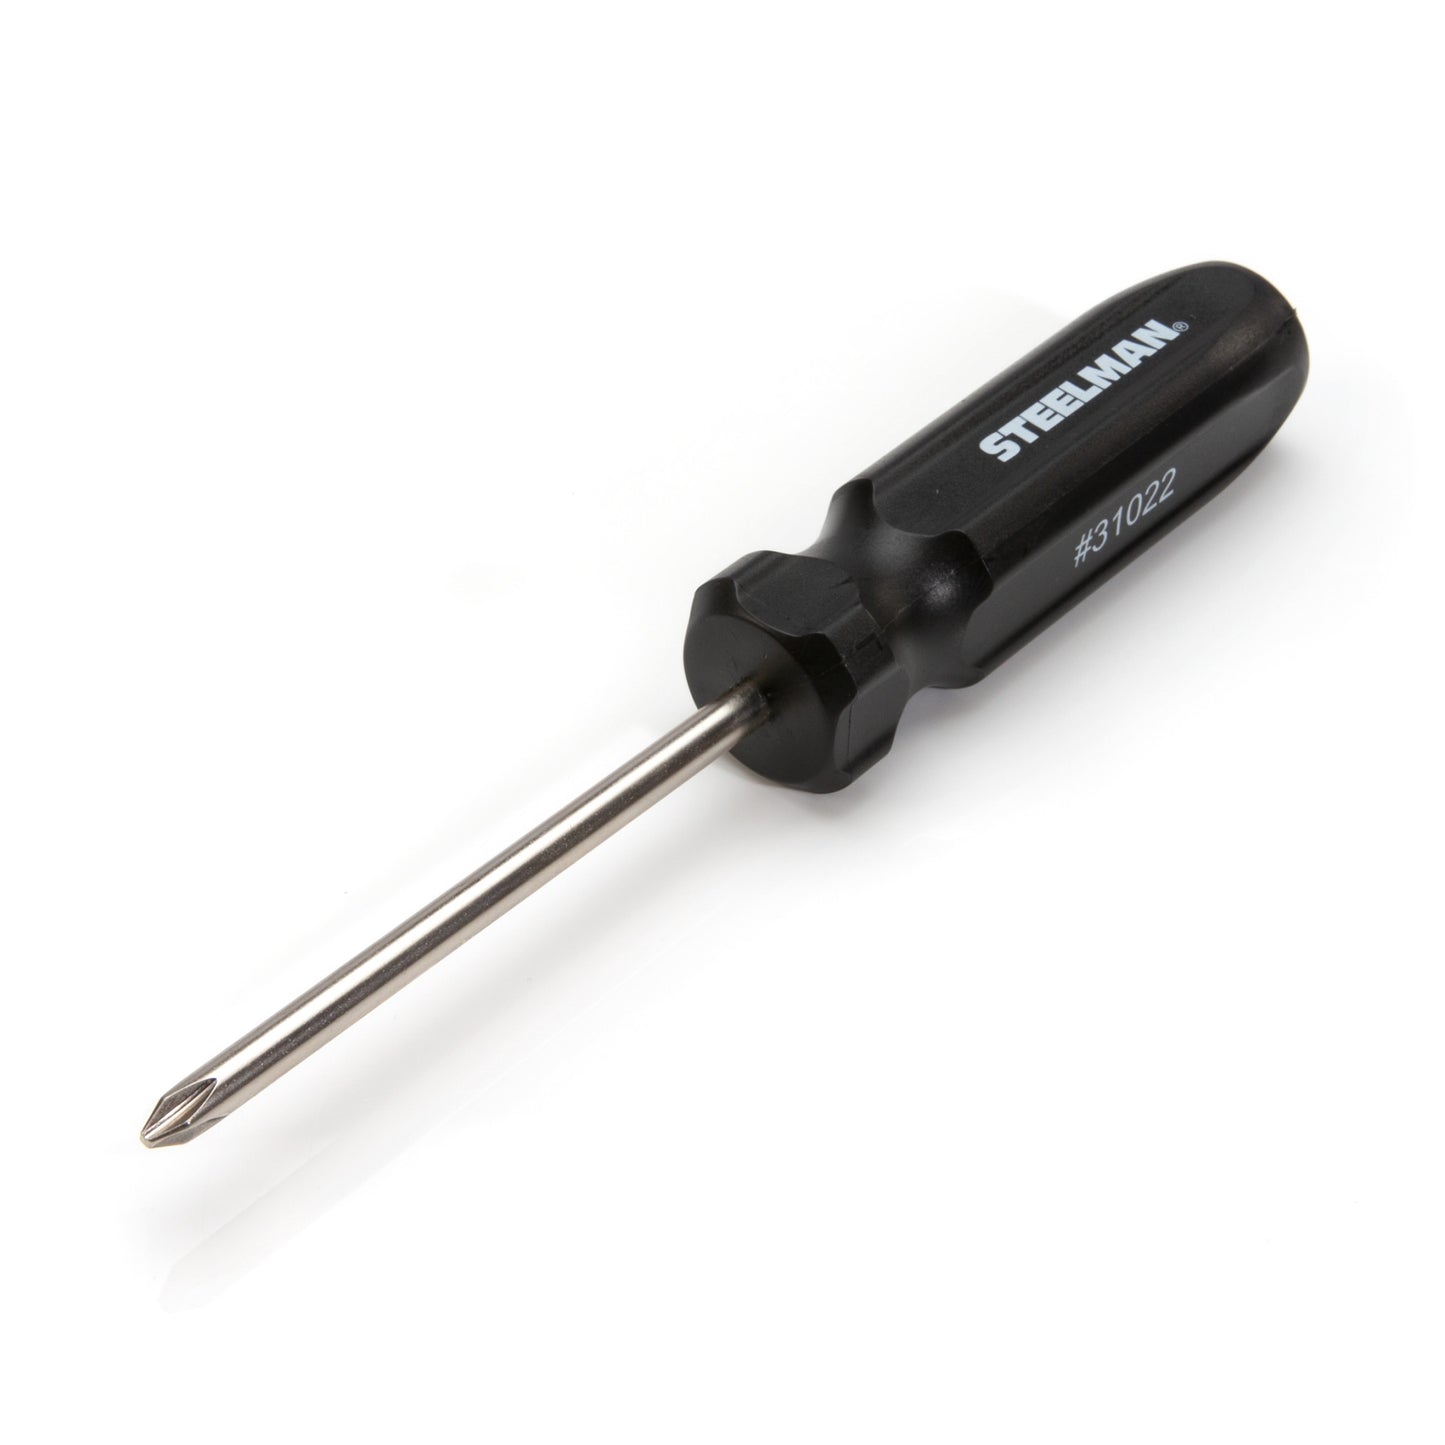 PH2 x 4-inch Phillips Tip Screwdriver with Fluted Handle